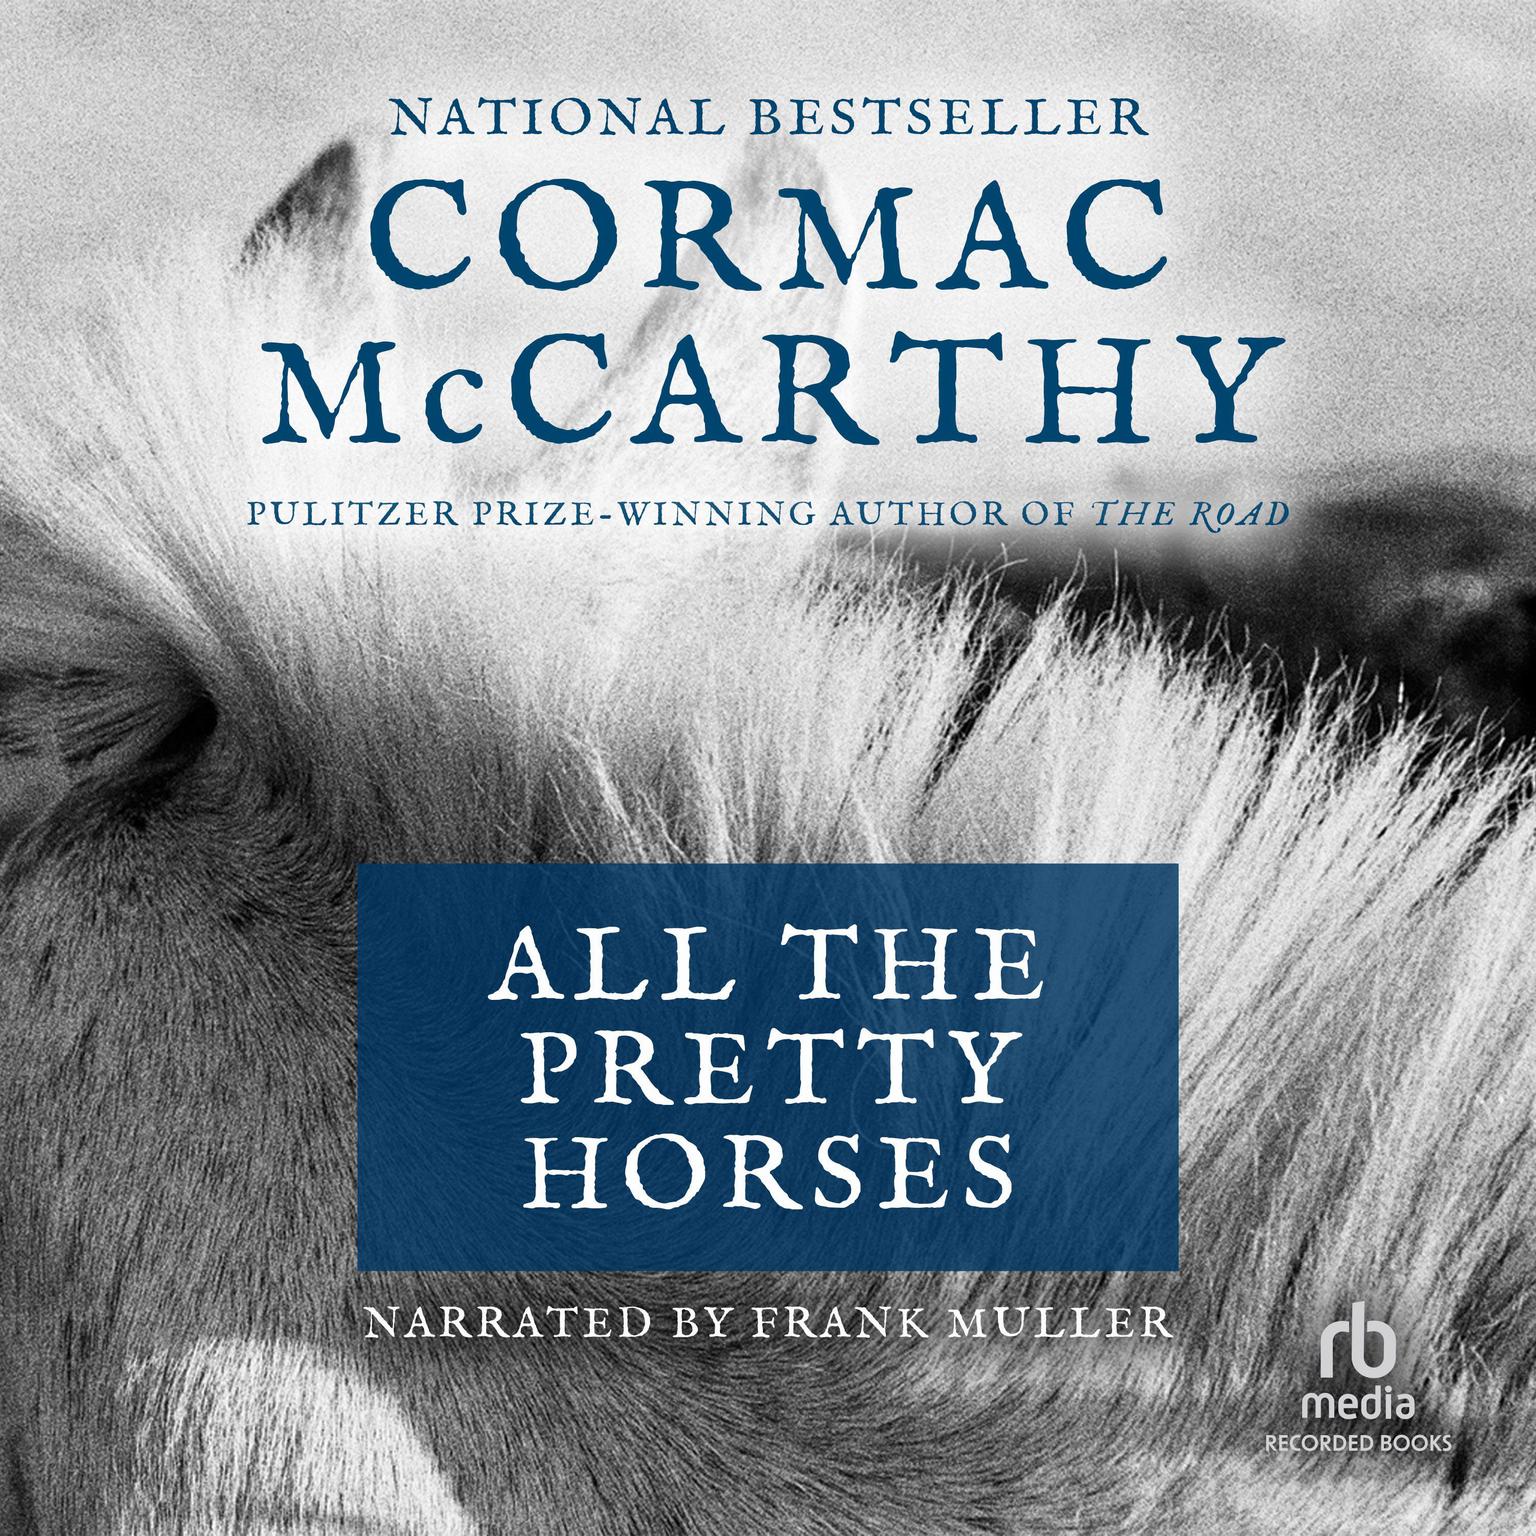 All the Pretty Horses Audiobook, by Cormac McCarthy